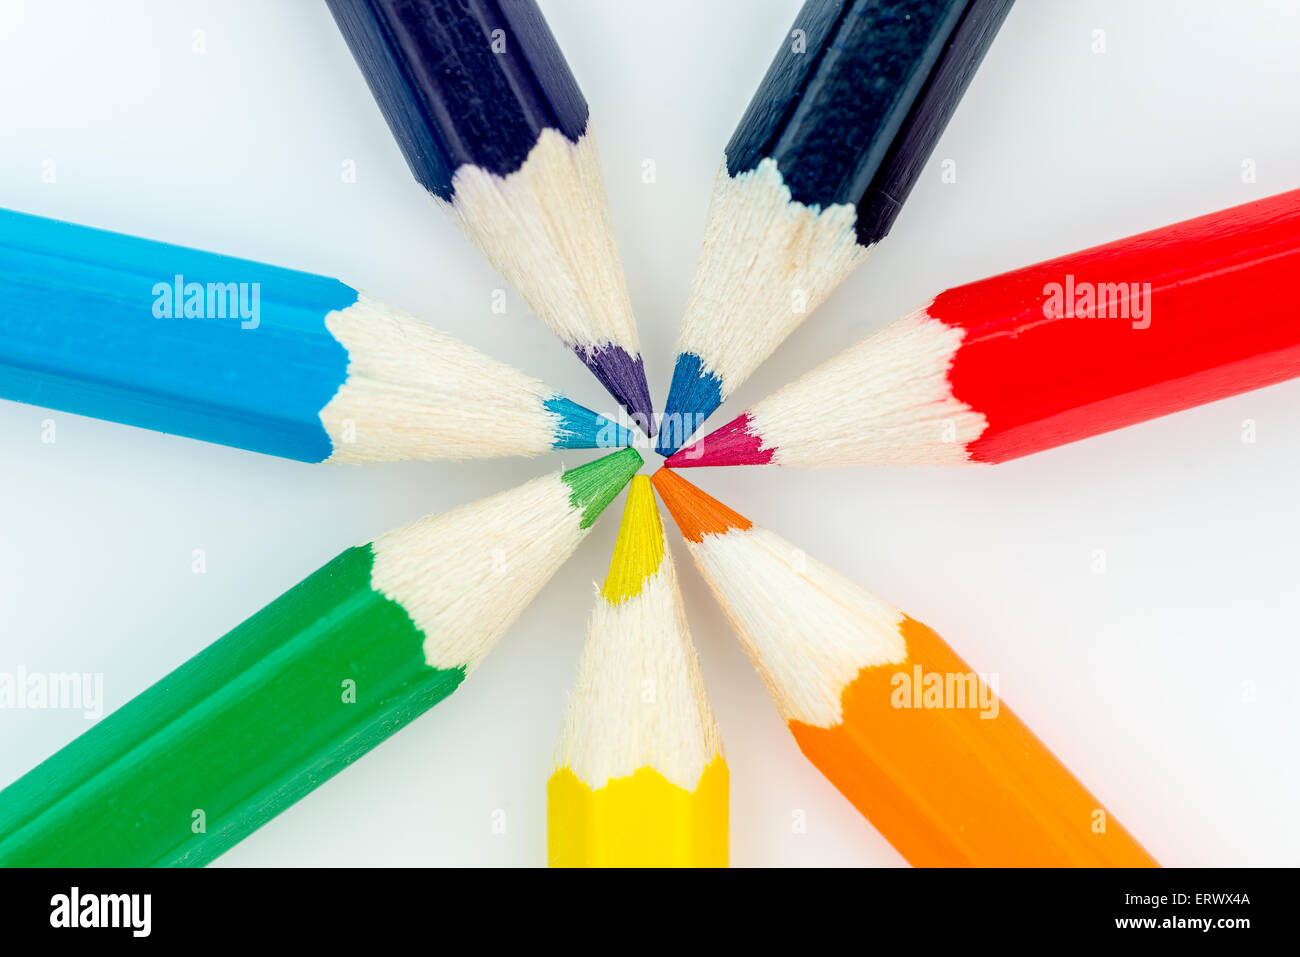 Red, Orange, Yellow, Green and blue pencils in a circle Stock Photo